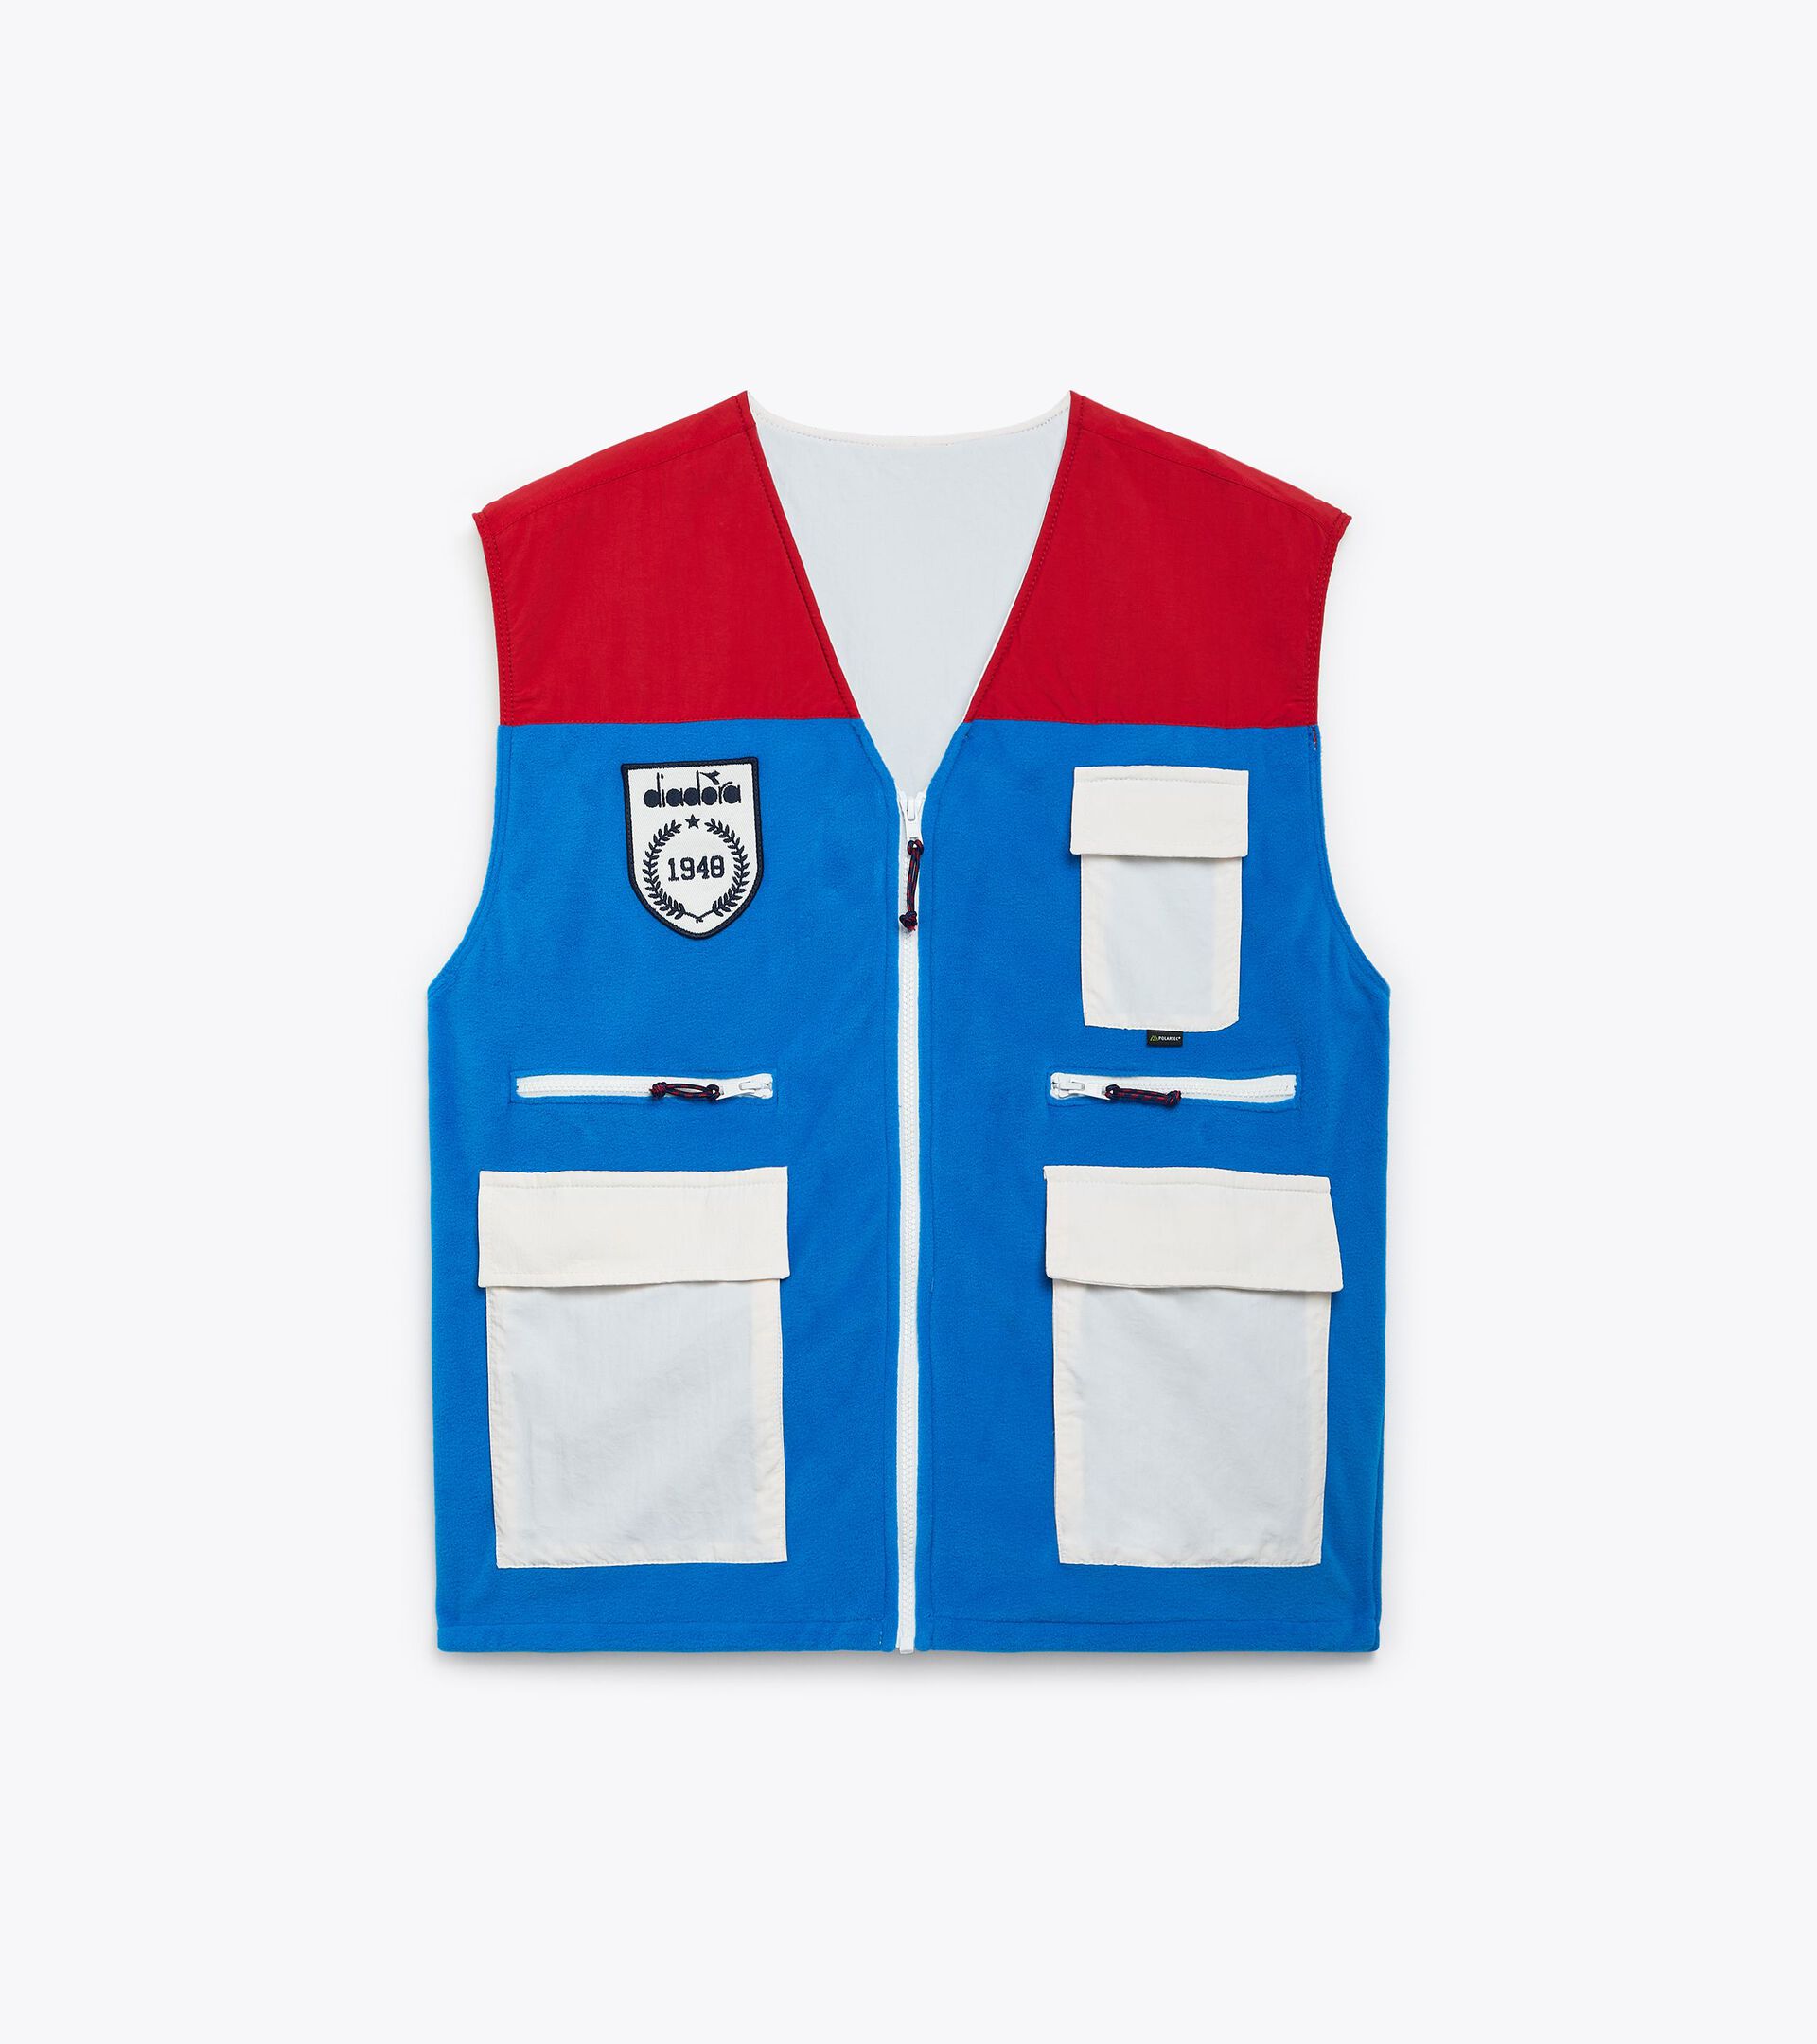 Gilet con tasche  - Made in Italy - Gender Neutral VEST LEGACY BL INDACO BUNTING/RSSO CARMINE - Diadora